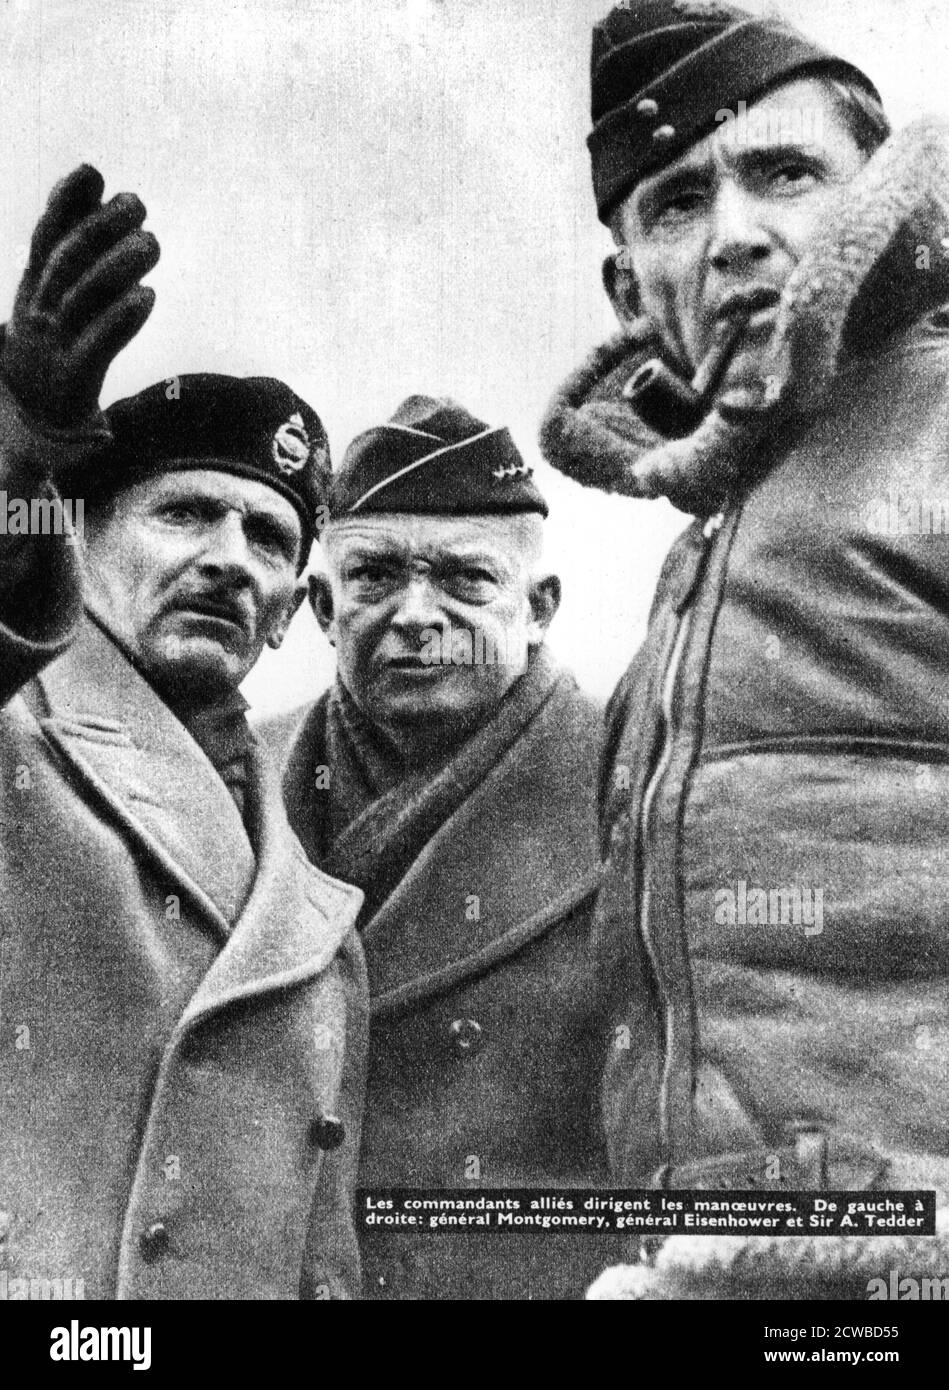 Allied commanders in France, 1944. From left to right; Field Marshal Bernard Montgomery, General Dwight D Eisenhower, Air Marshal Sir Arthur Tedder. The photographer is unknown. Stock Photo